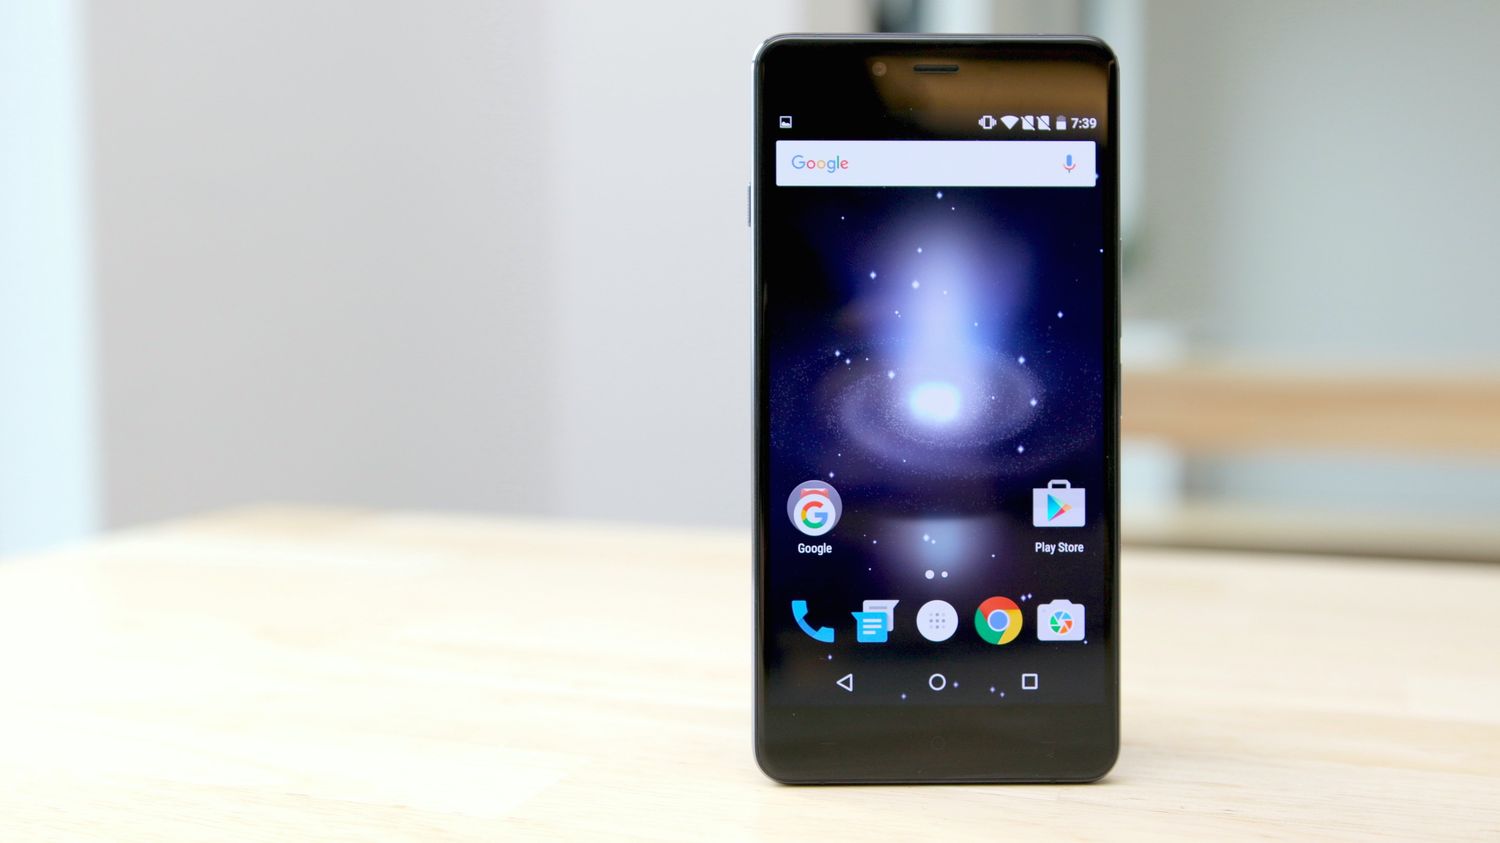 oneplus-turns-2-and-launches-champagne-oneplus-x